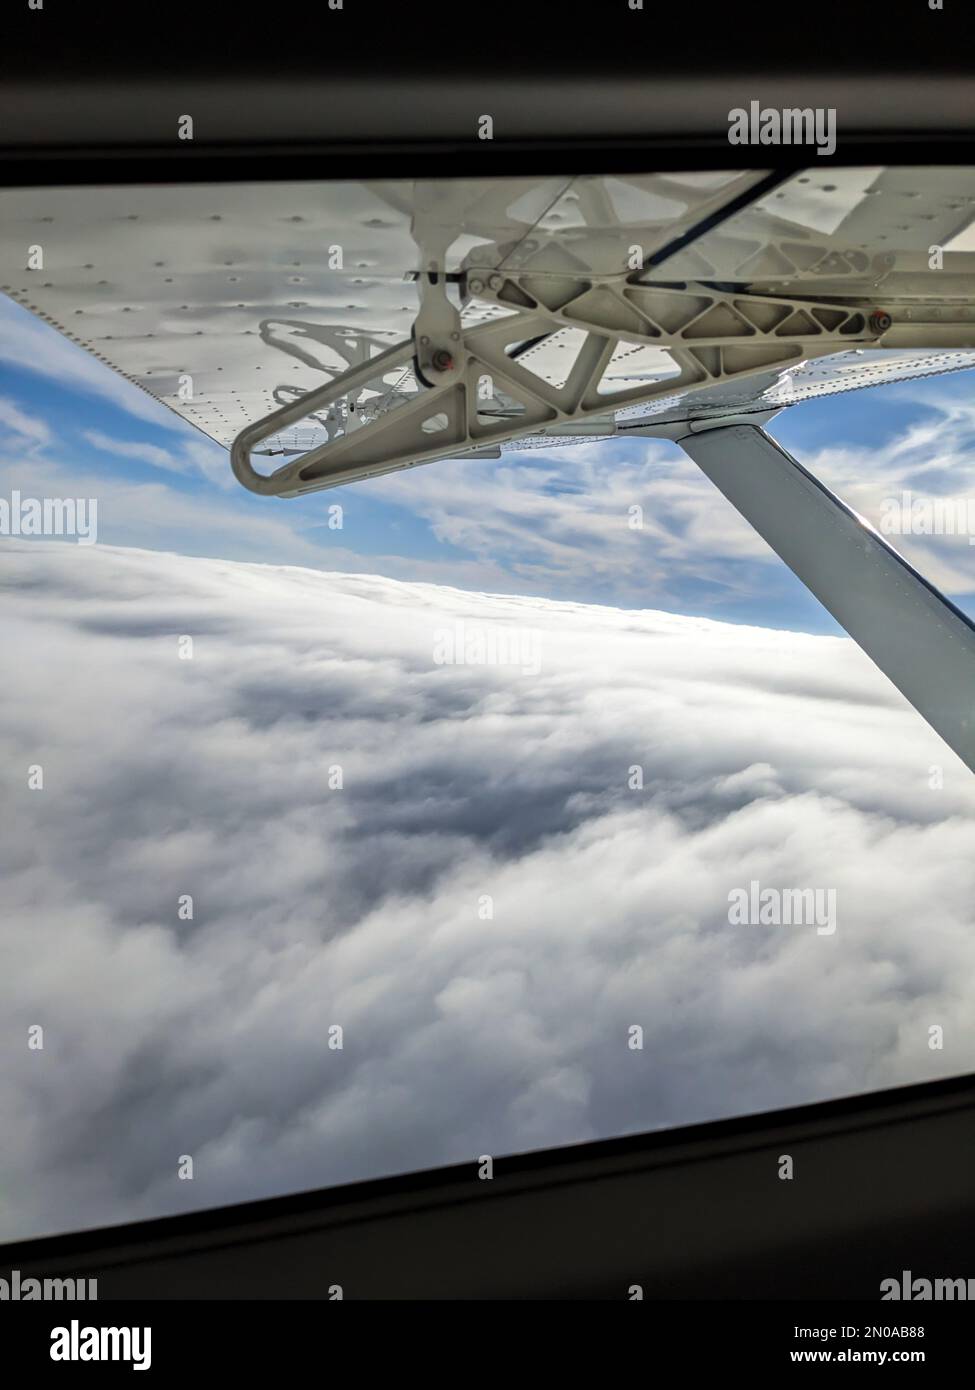 Window view from light general aviation aircraft. Strut and wing of semi-cantilever high-wing airplane flying over the clouds on a sunny day. Stock Photo